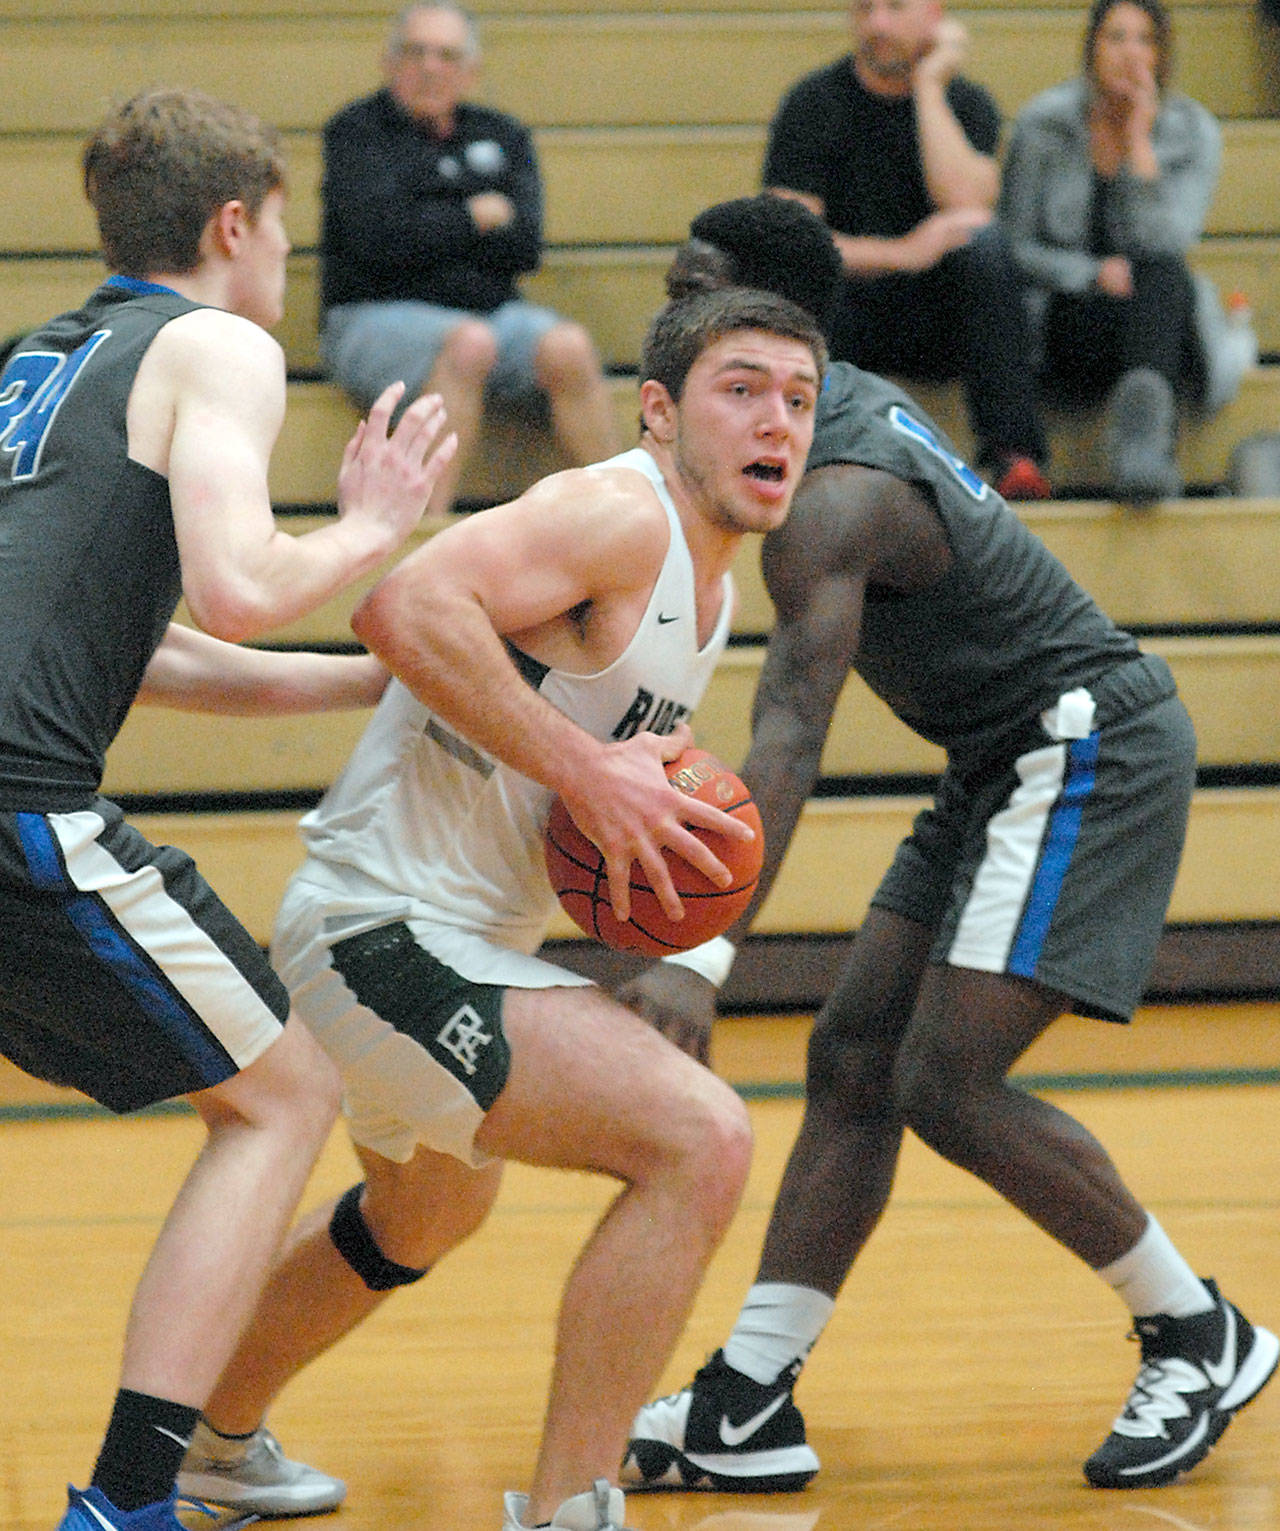 Port Angeles’ Anton Kathol, center, looks for a way around the defense of Olympic’s Caleb Erickson, left, and Kendall McInnis on Tuesday night at Port Angeles High School. (Keith Thorpe/Peninsula Daily News)